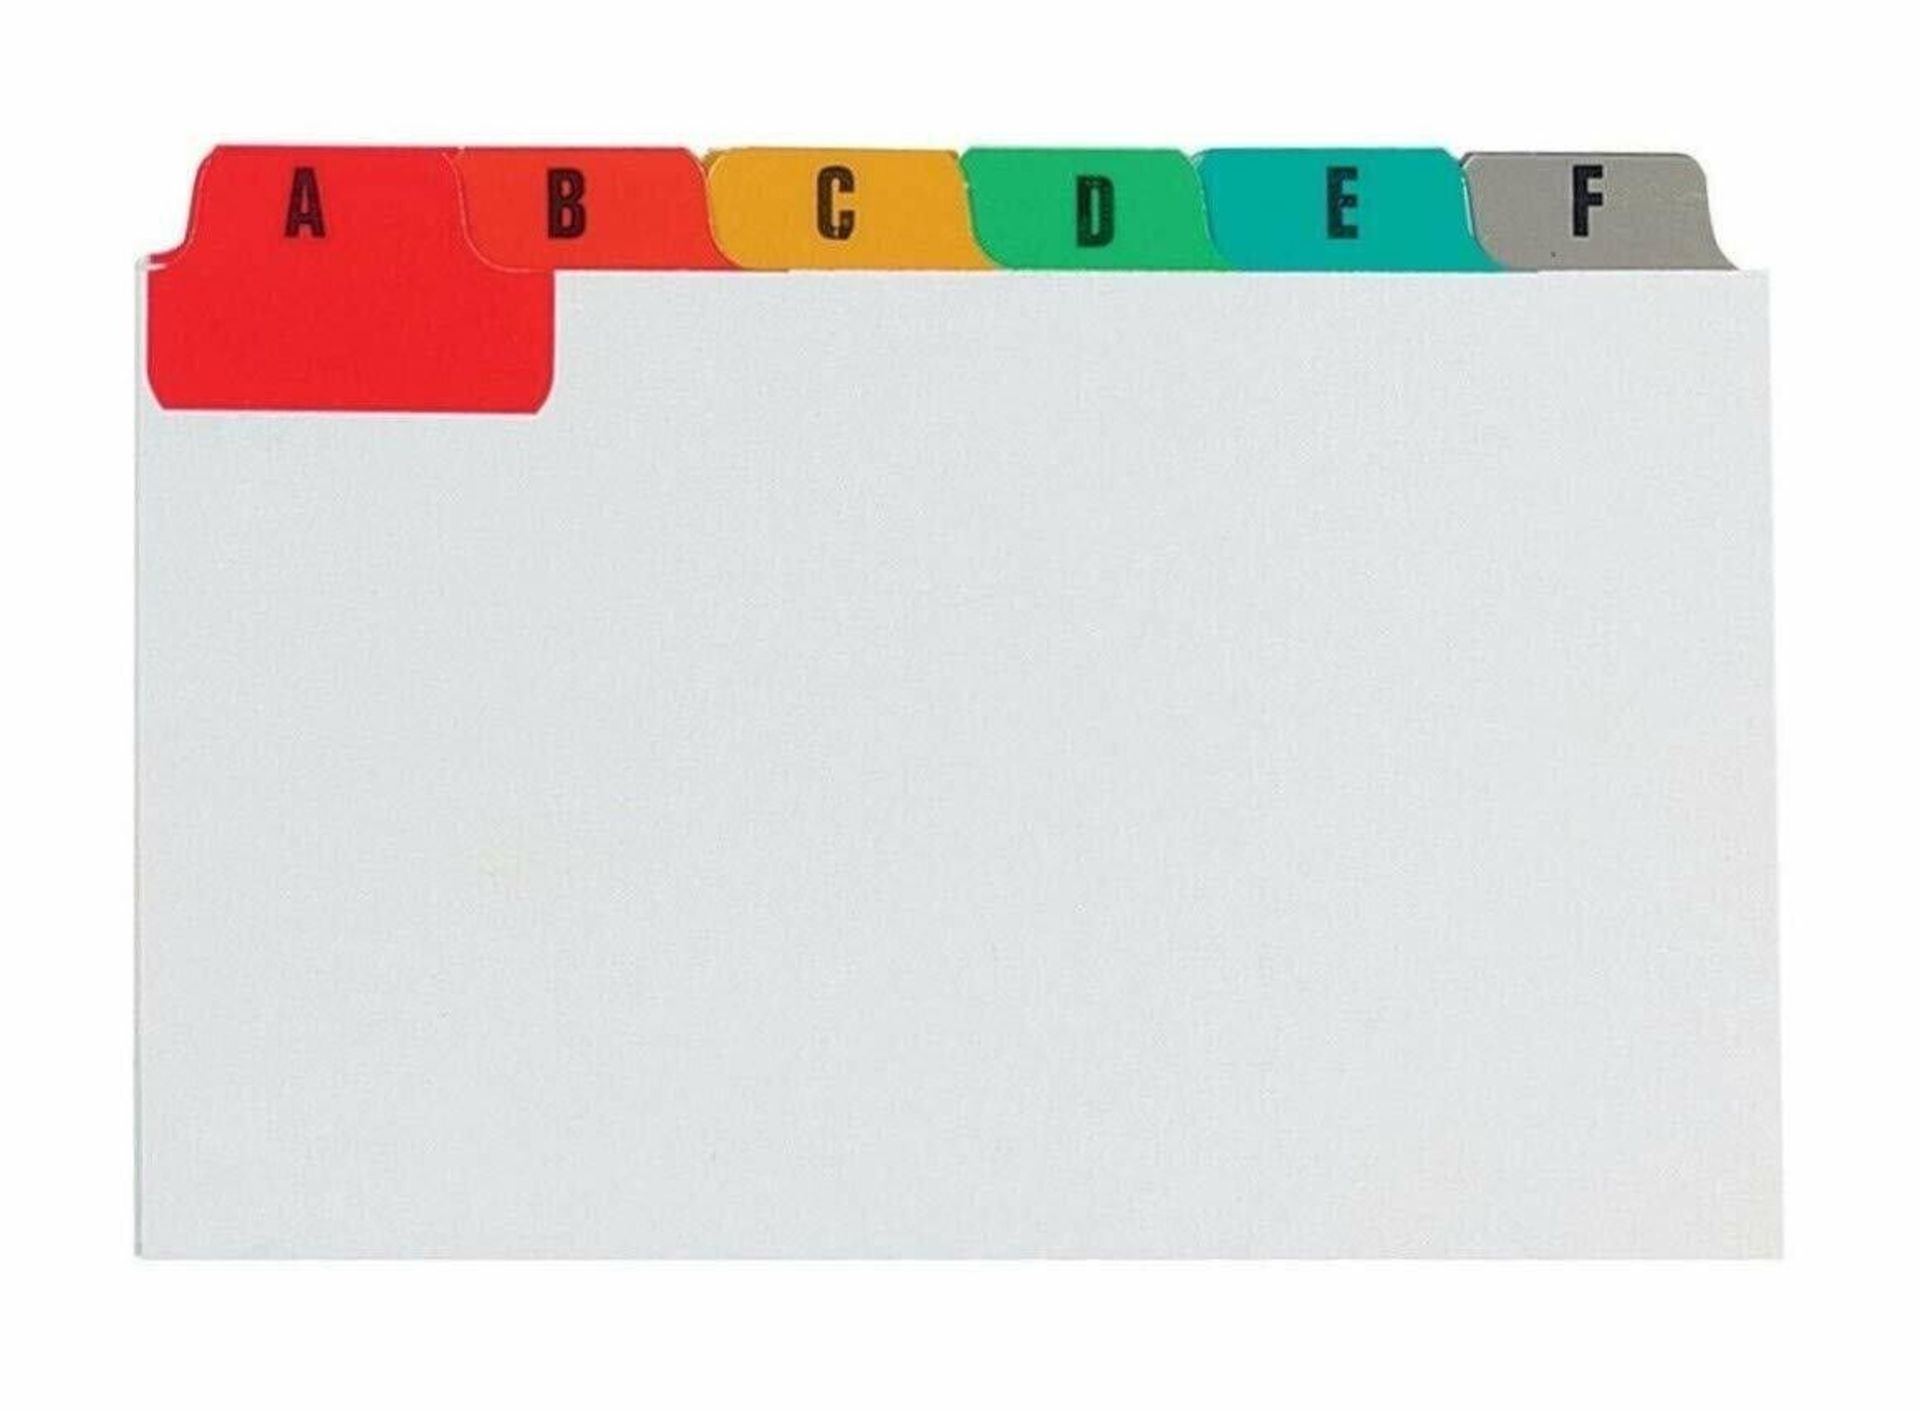 50 x Concord TS-110575 Reinforced A-Z Guide Card With Tabs, 127mm x 76mm, White - Image 2 of 2